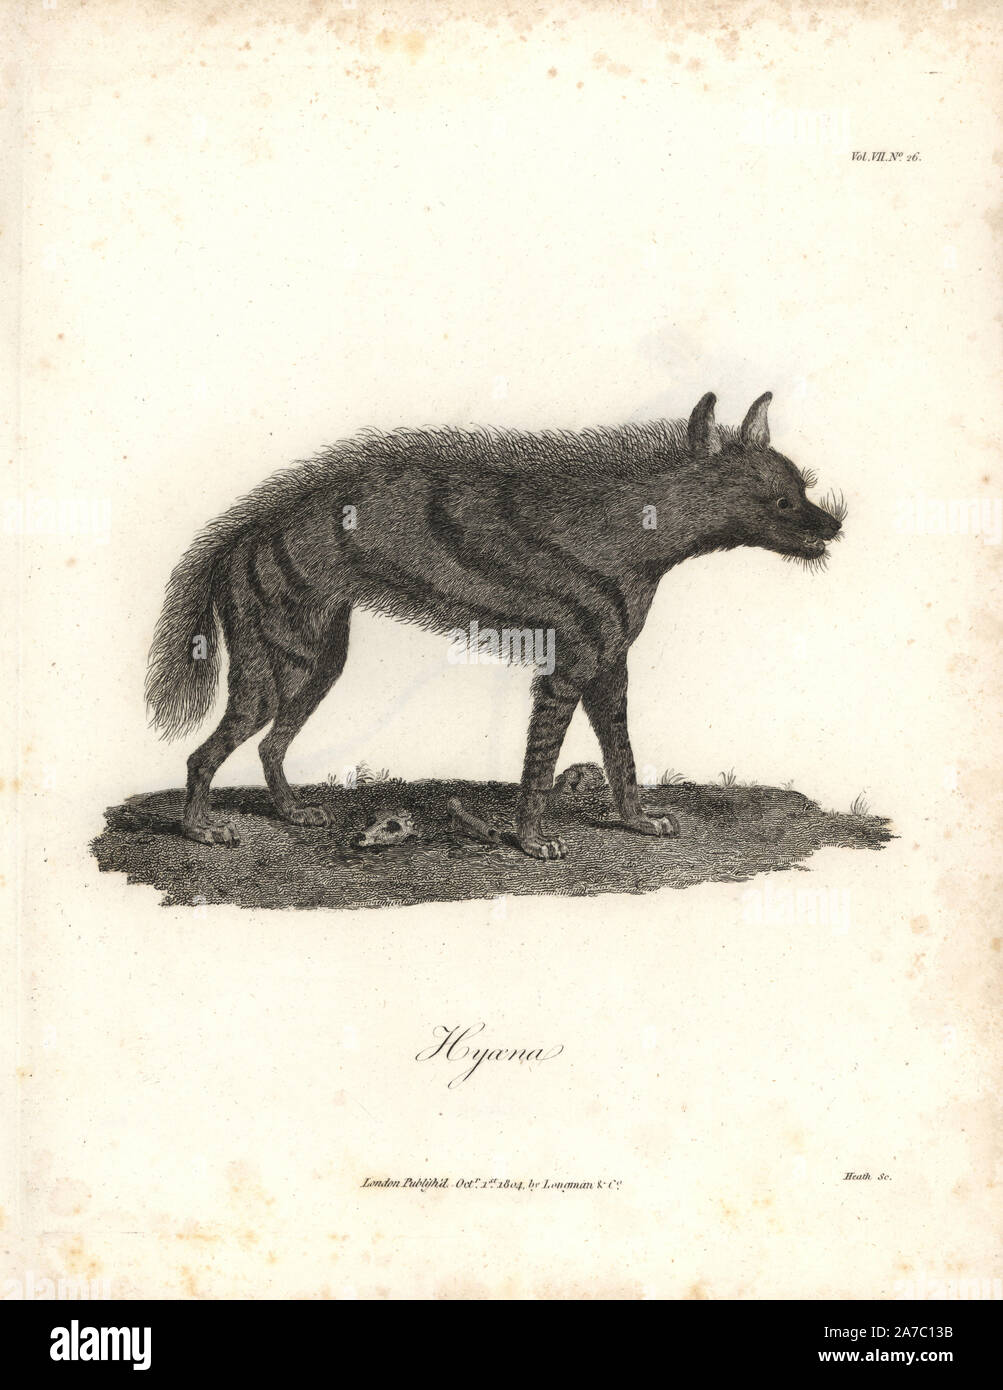 Striped hyena, Hyaena hyaena. Copperplate engraving from James Bruce's 'Travels to Discover the Source of the Nile, in the years 1768, 1769, 1770, 1771, 1772 and 1773,' London, 1790. James Bruce (1730-1794) was a Scottish explorer and travel writer who spent more than 12 years in North Africa and Ethiopia. Engraved by Heath after an original drawing by Bruce. Stock Photo